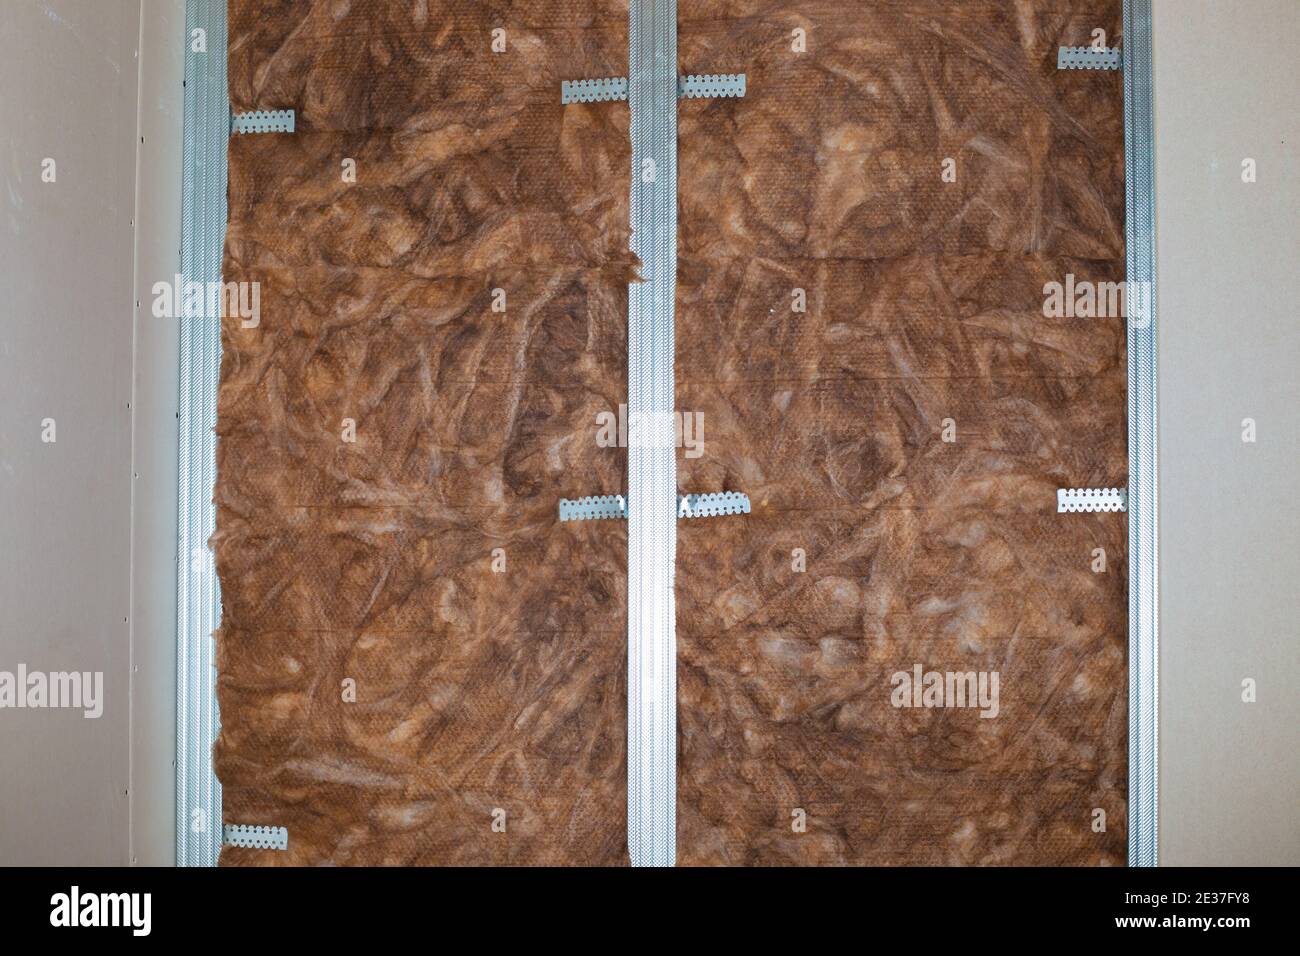 Insulation and sound insulation of walls with mineral wool, before facing with plasterboard. Home renovation,. Stock Photo